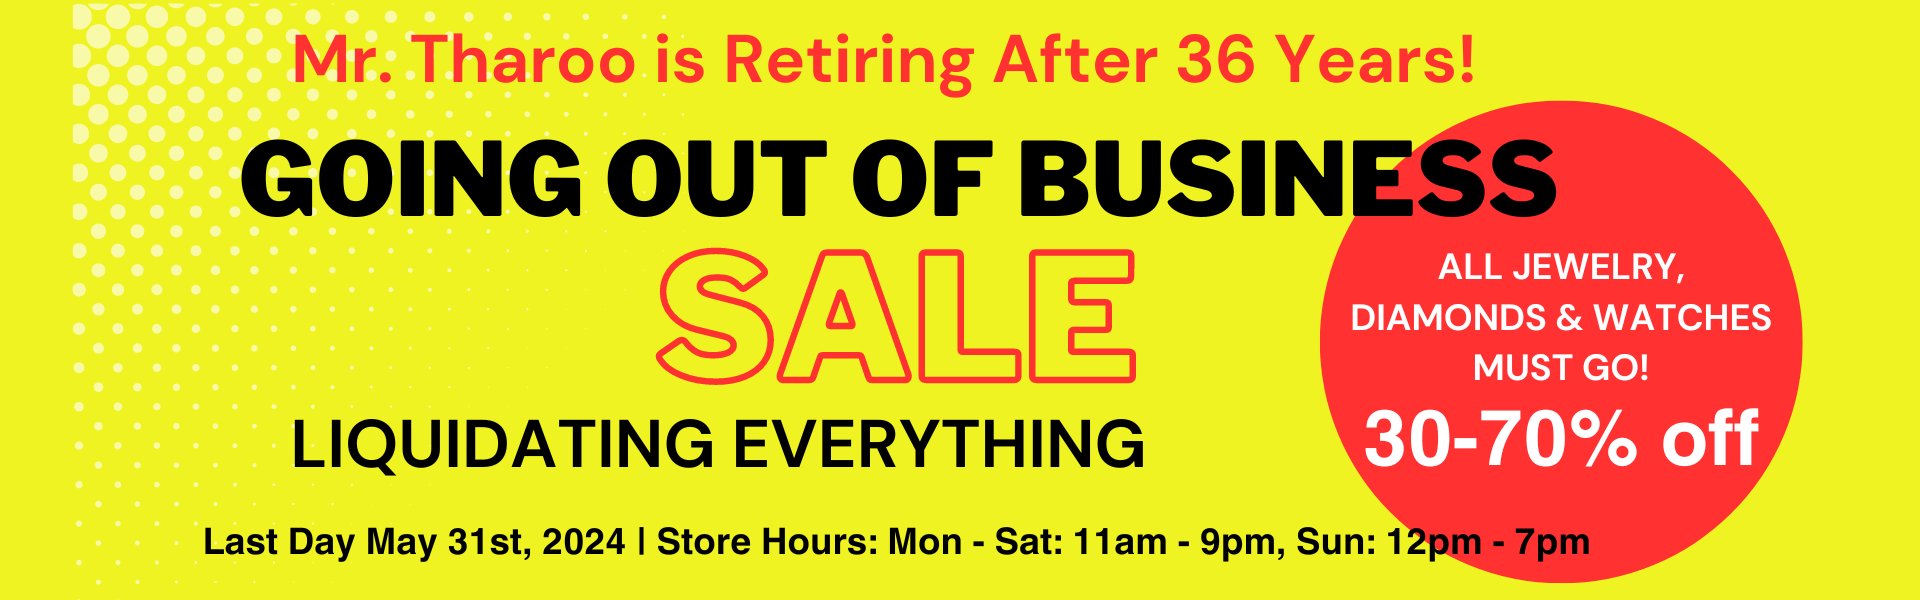 Going Out of Business Liquidation Sale